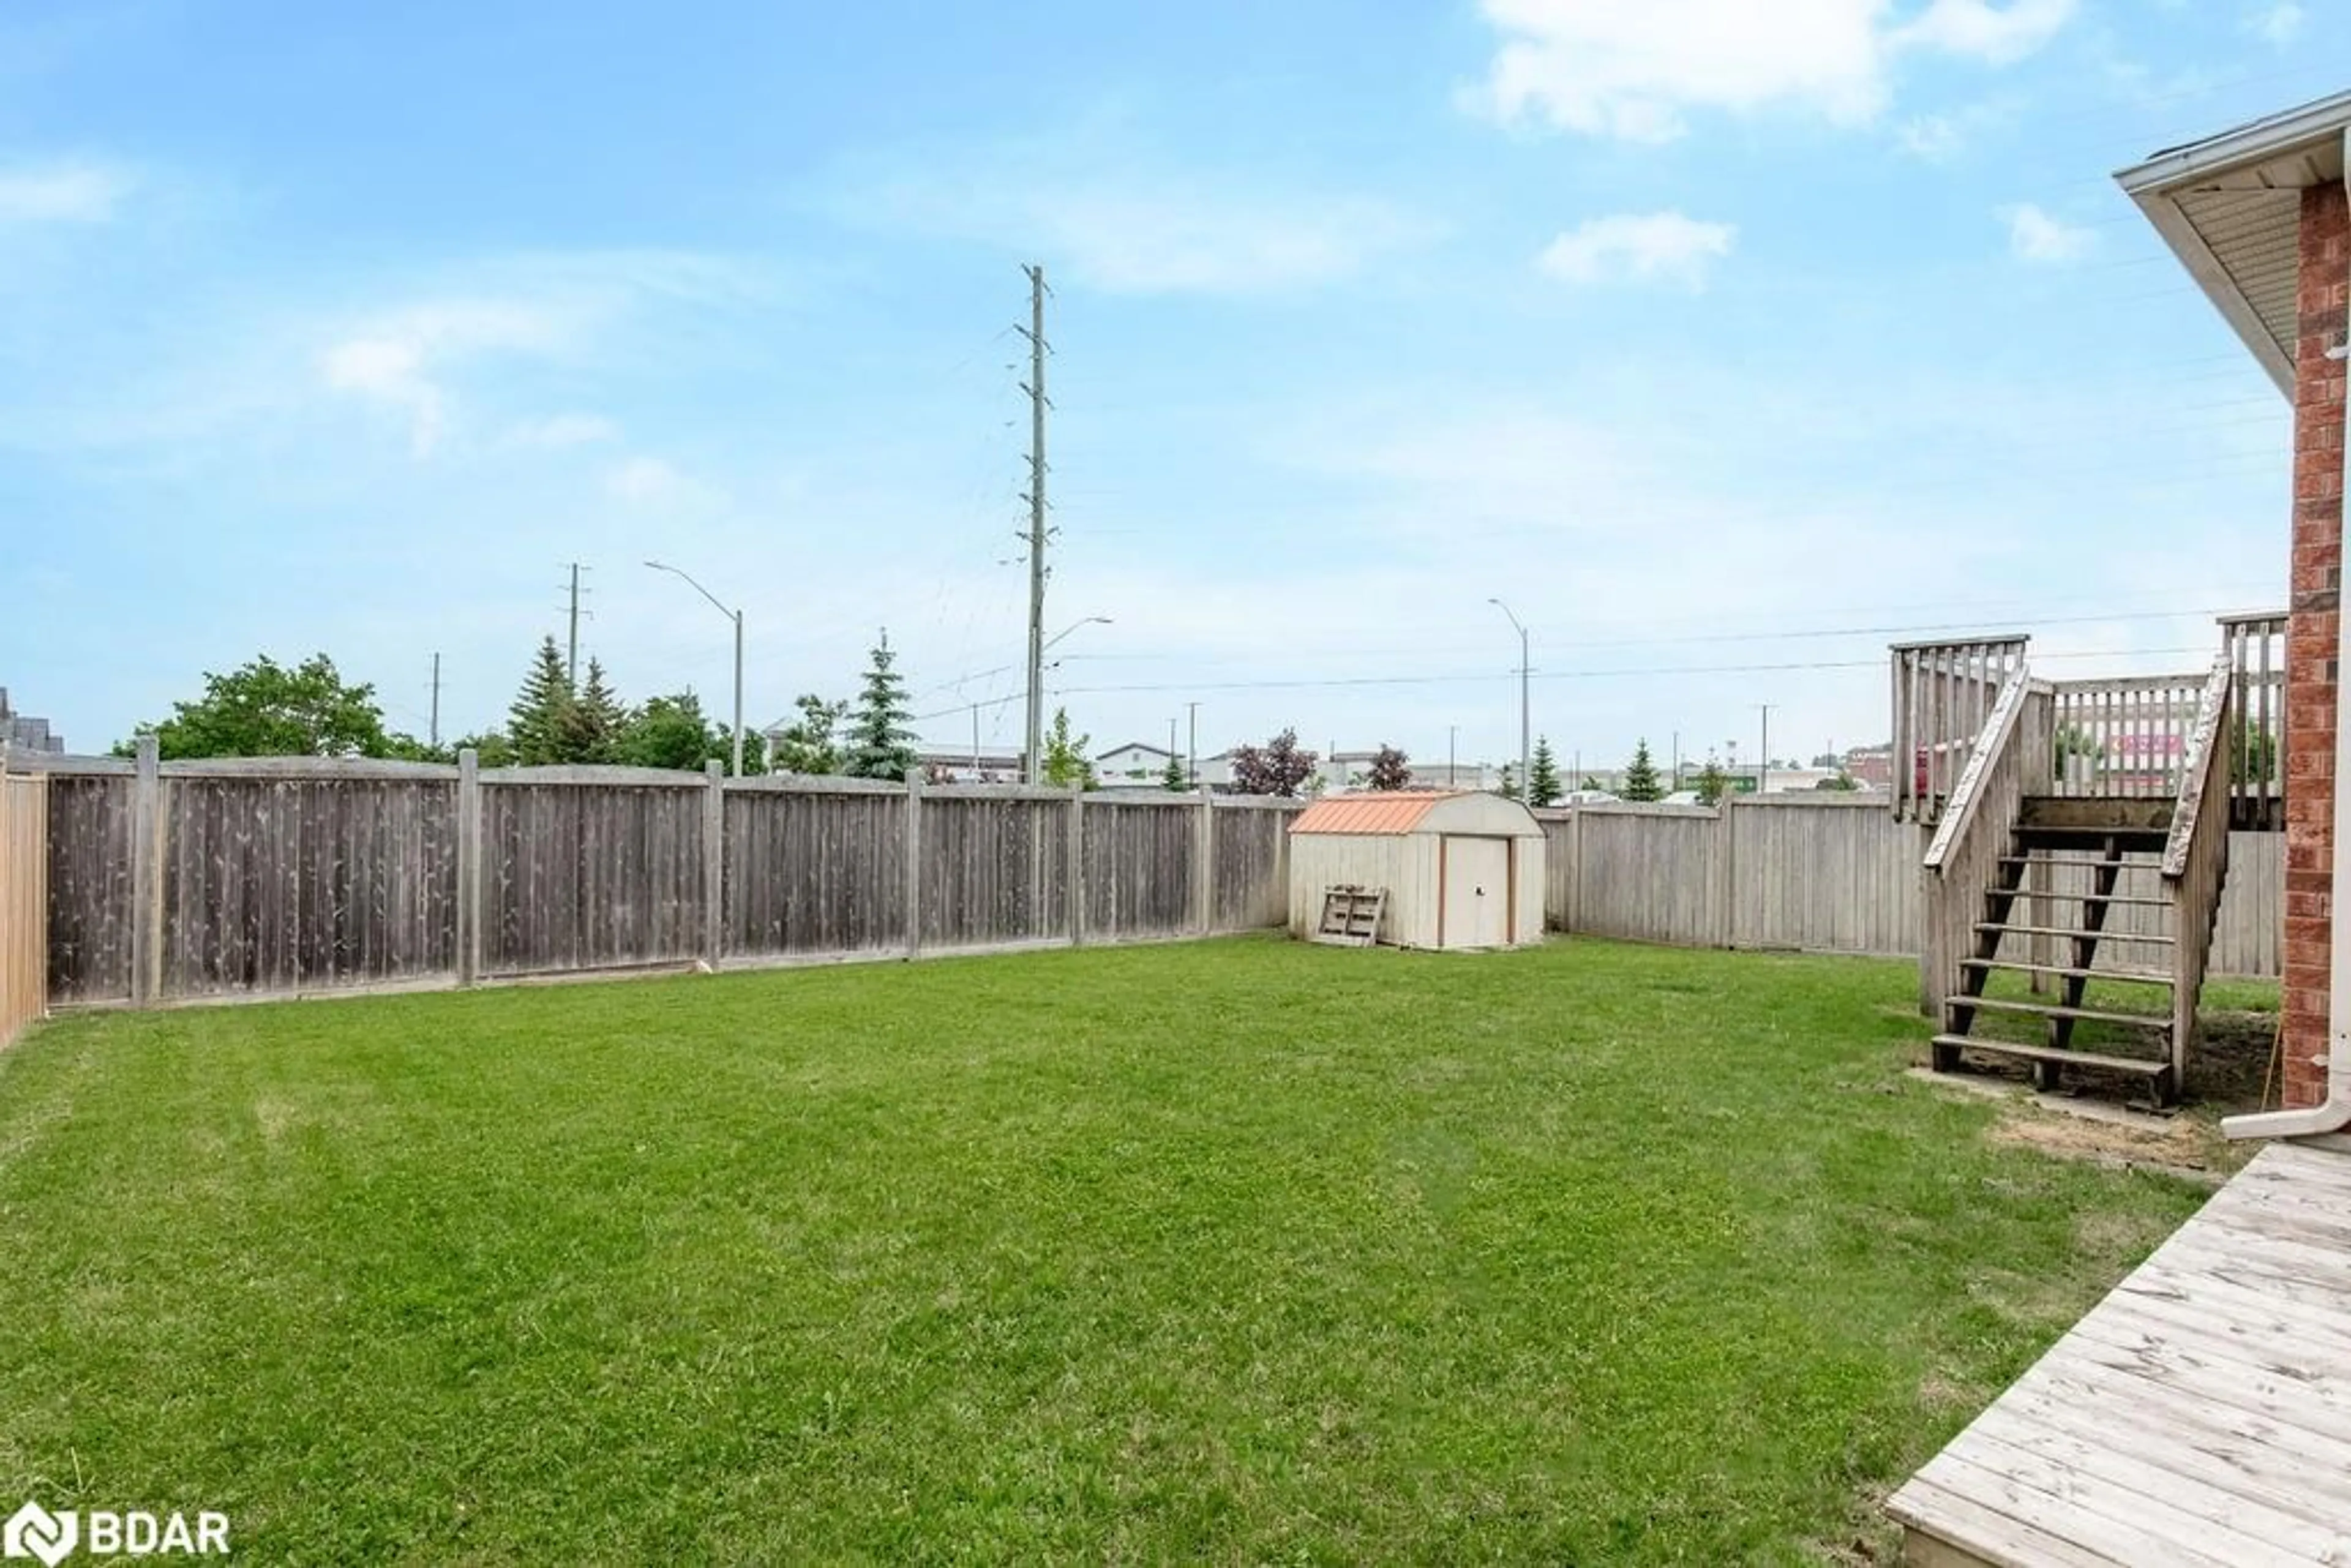 Fenced yard for 1 Pacific Ave, Barrie Ontario L4M 7E7